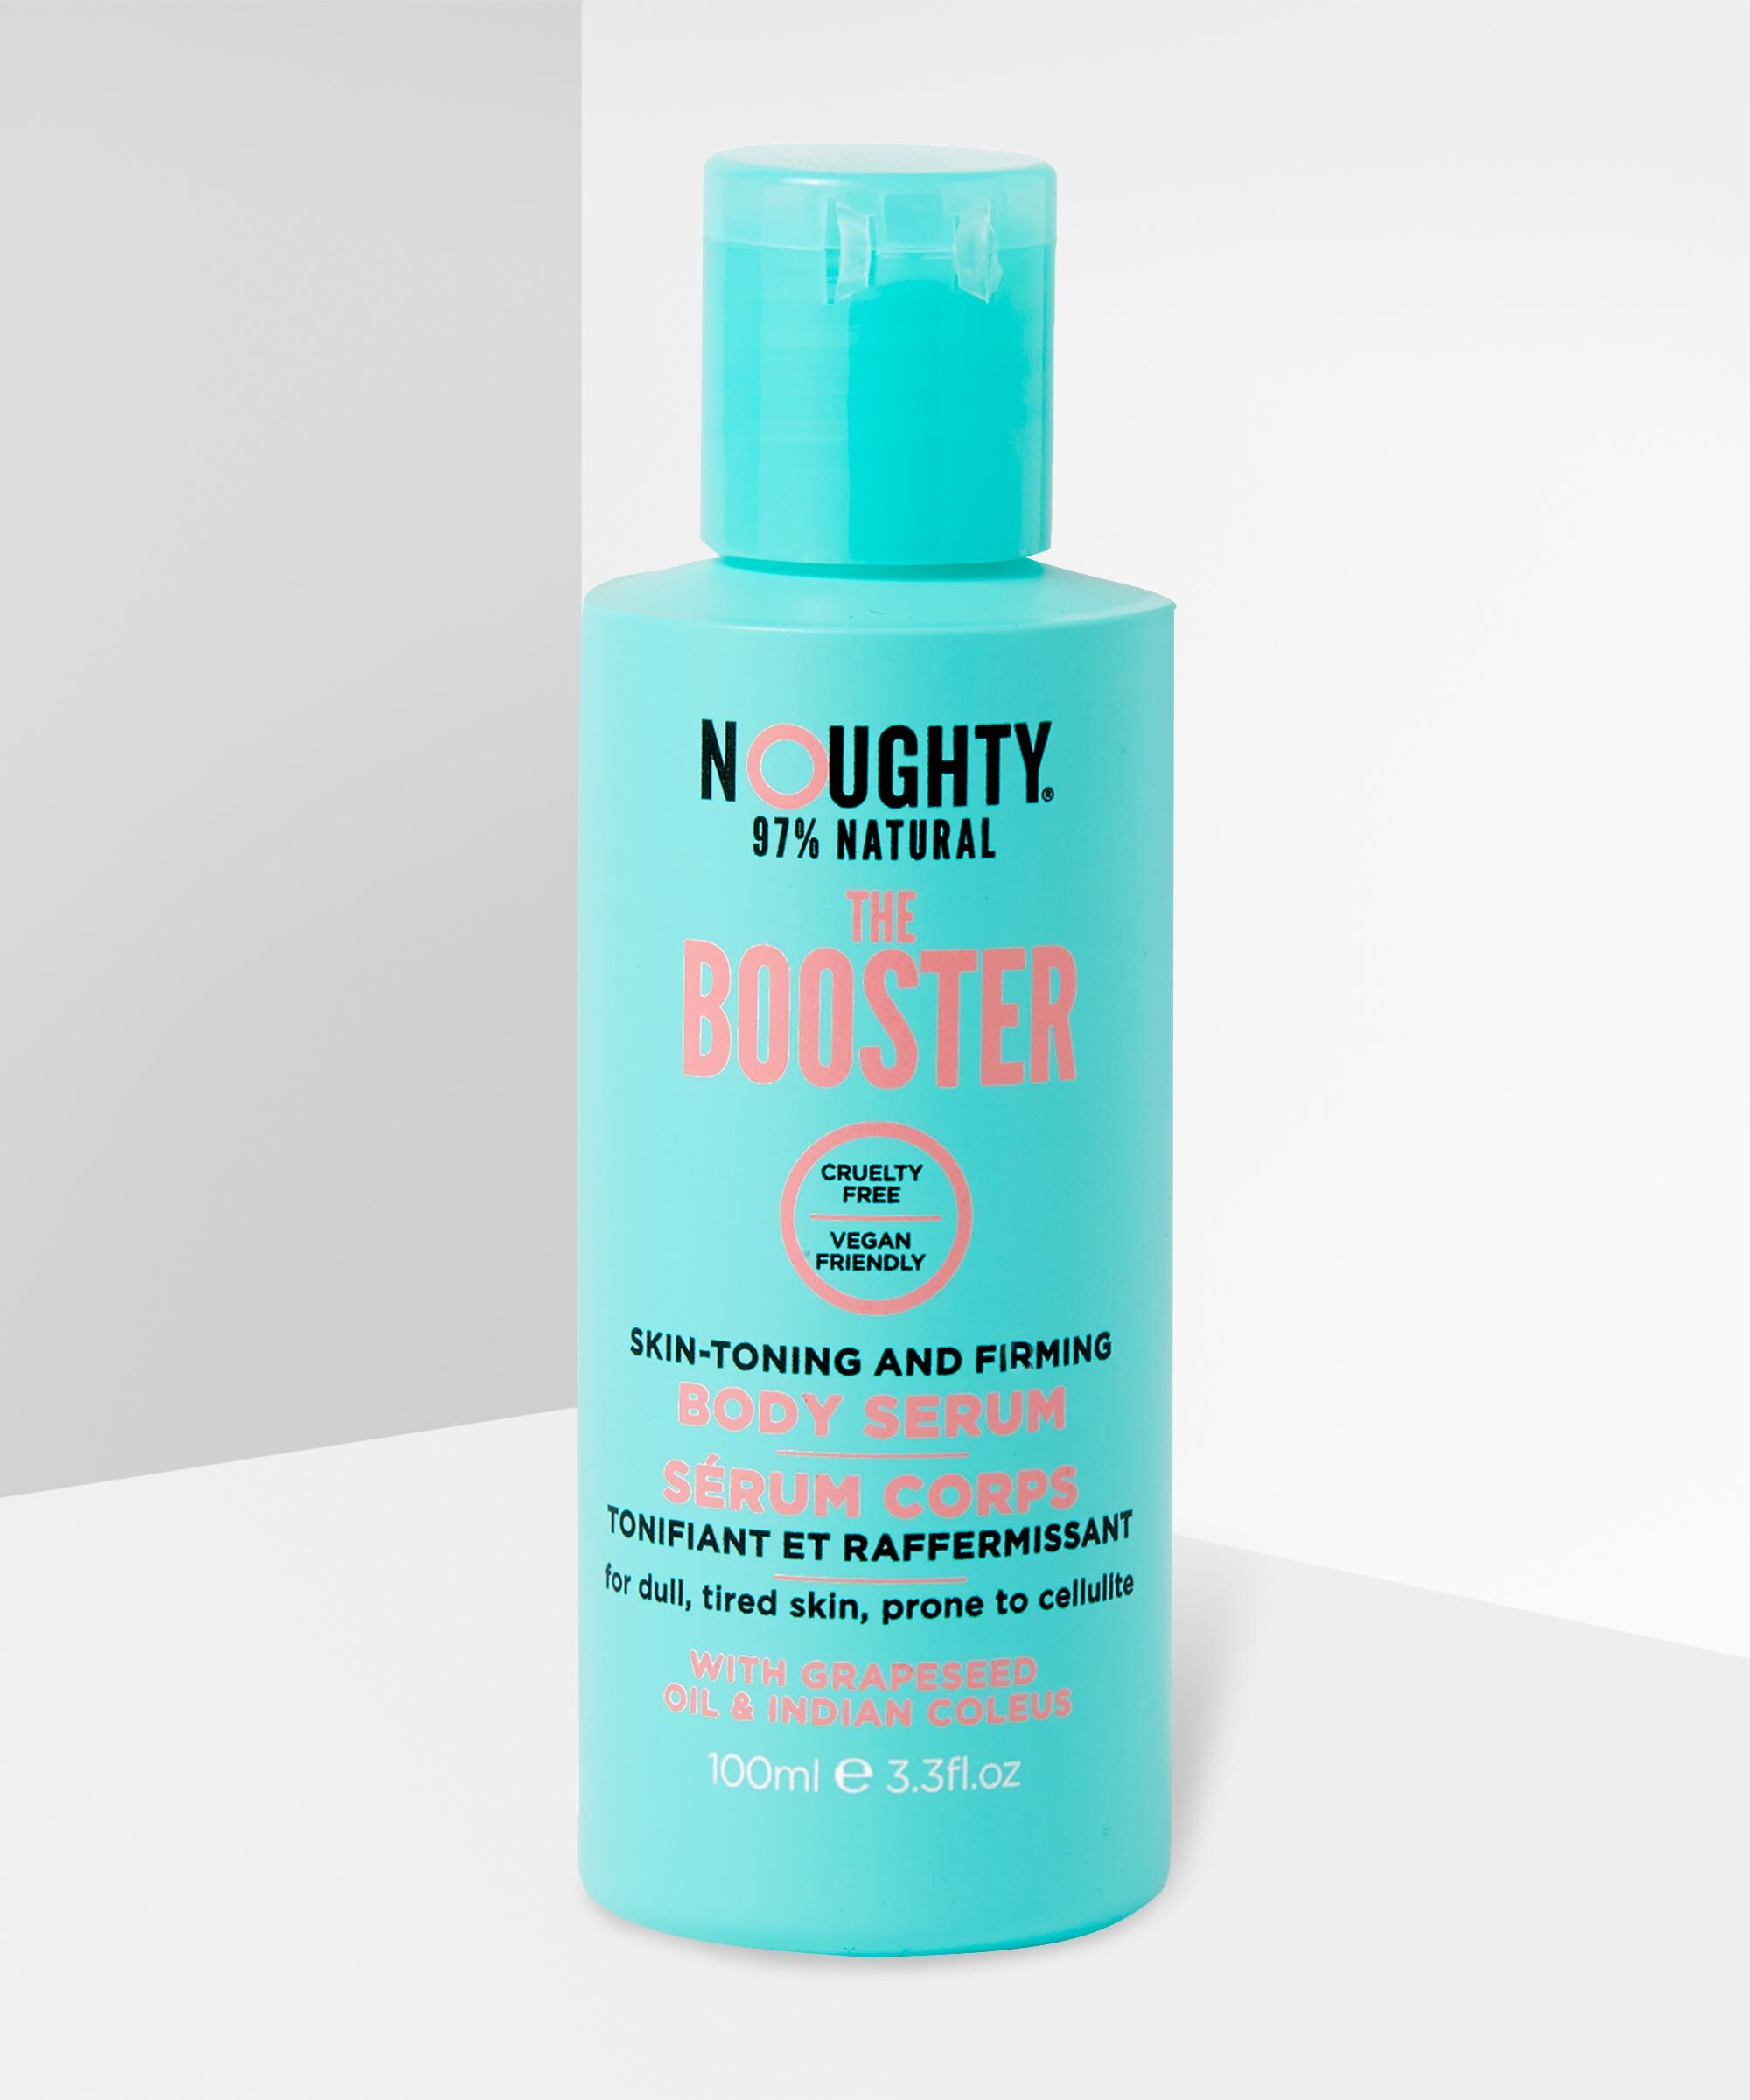 Noughty - The Booster Body Serum